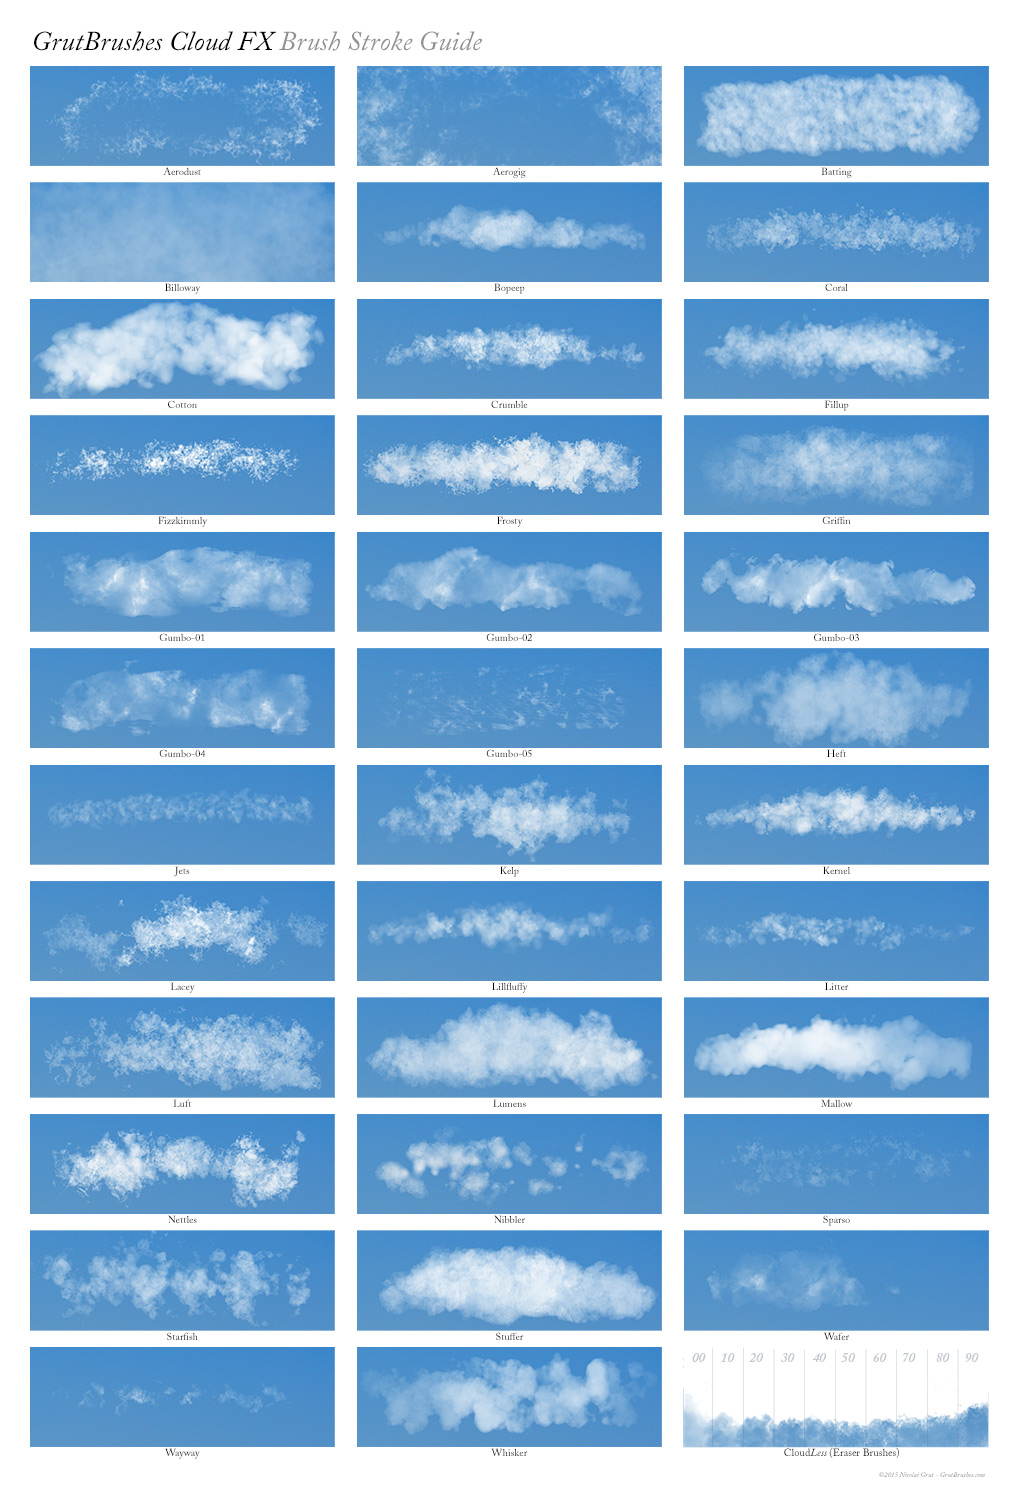 Sample Brush Strokes of all 50 of the GrutBrushes Cloud Brushes and Tools